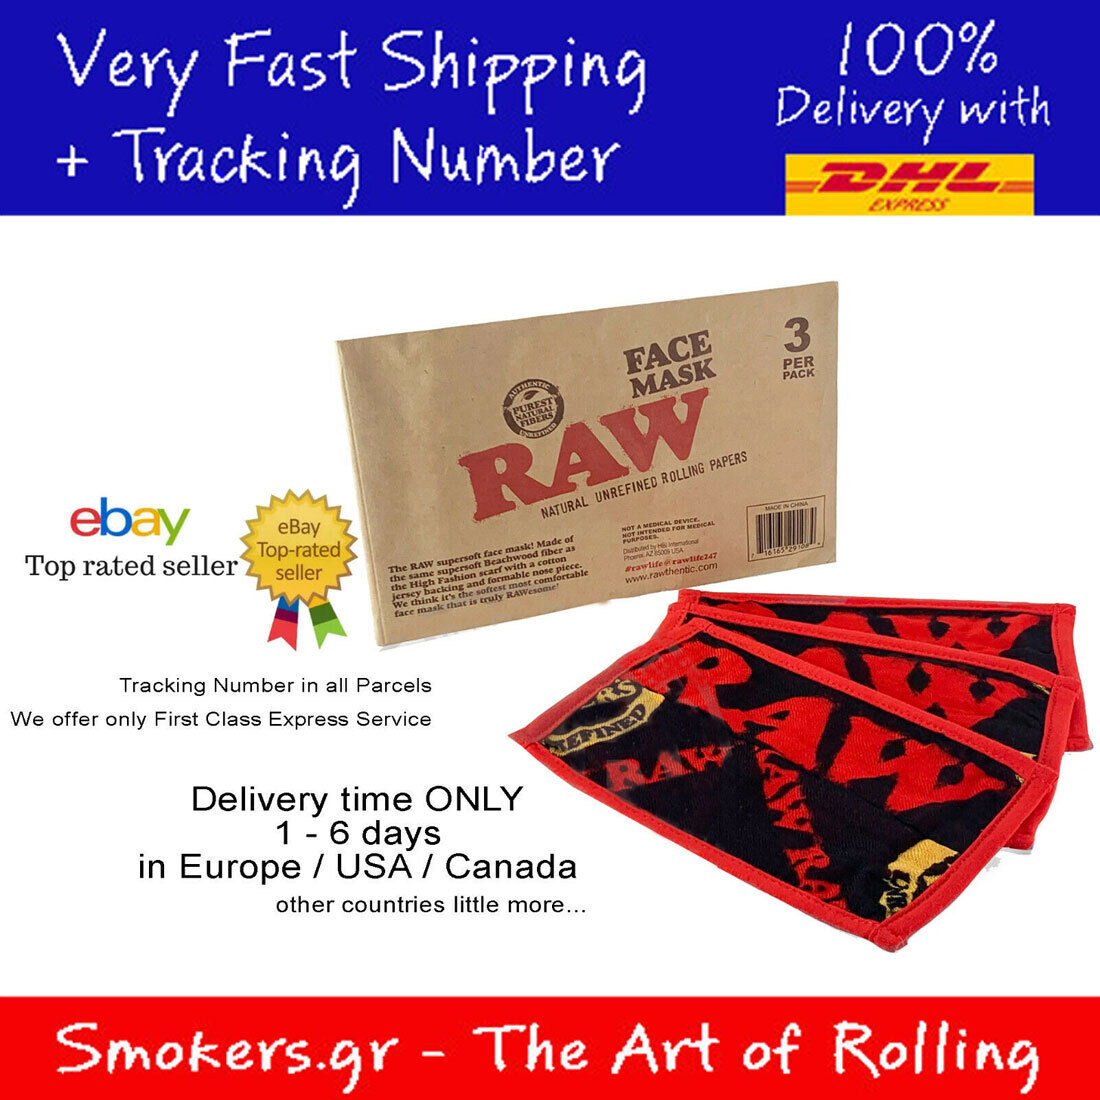 1x Original RAW Face Mask 3-Pack rolling papers filters